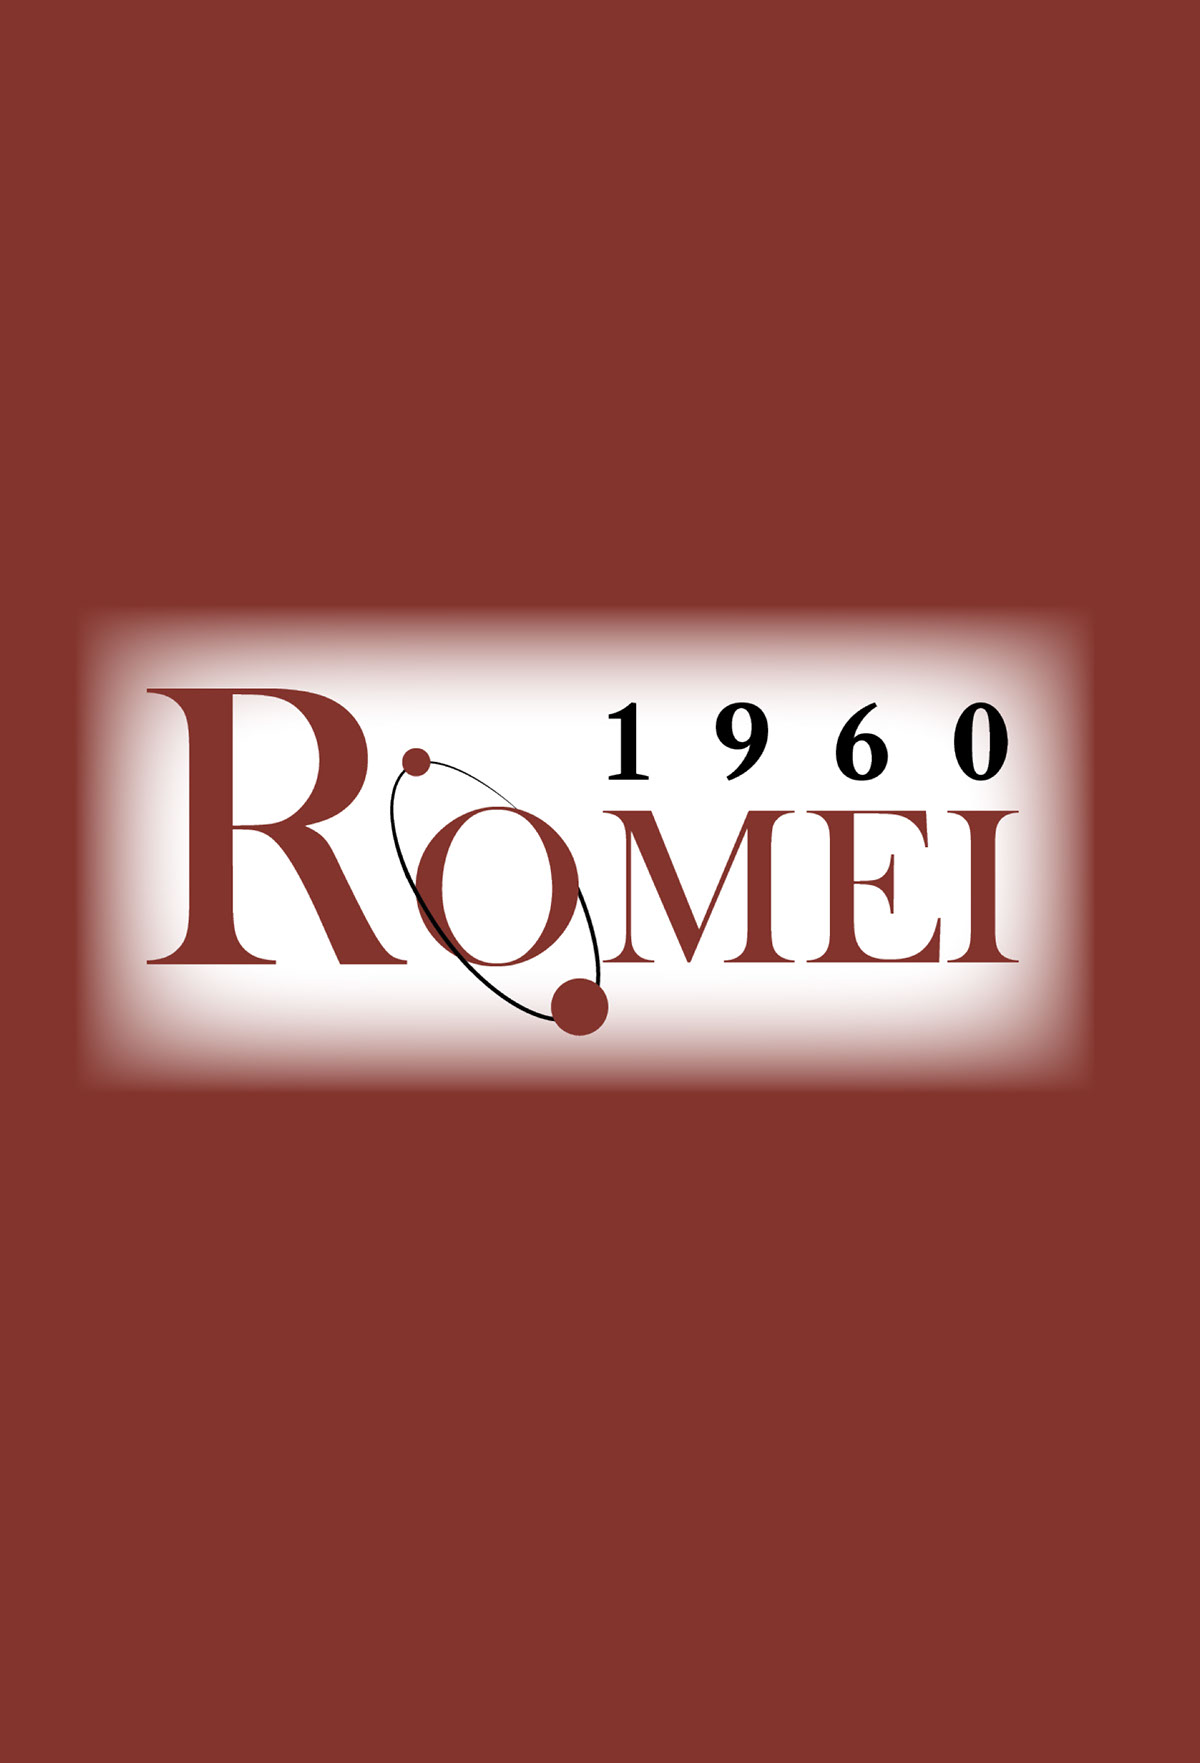 Corporate Identity Cantine Romei rendition image